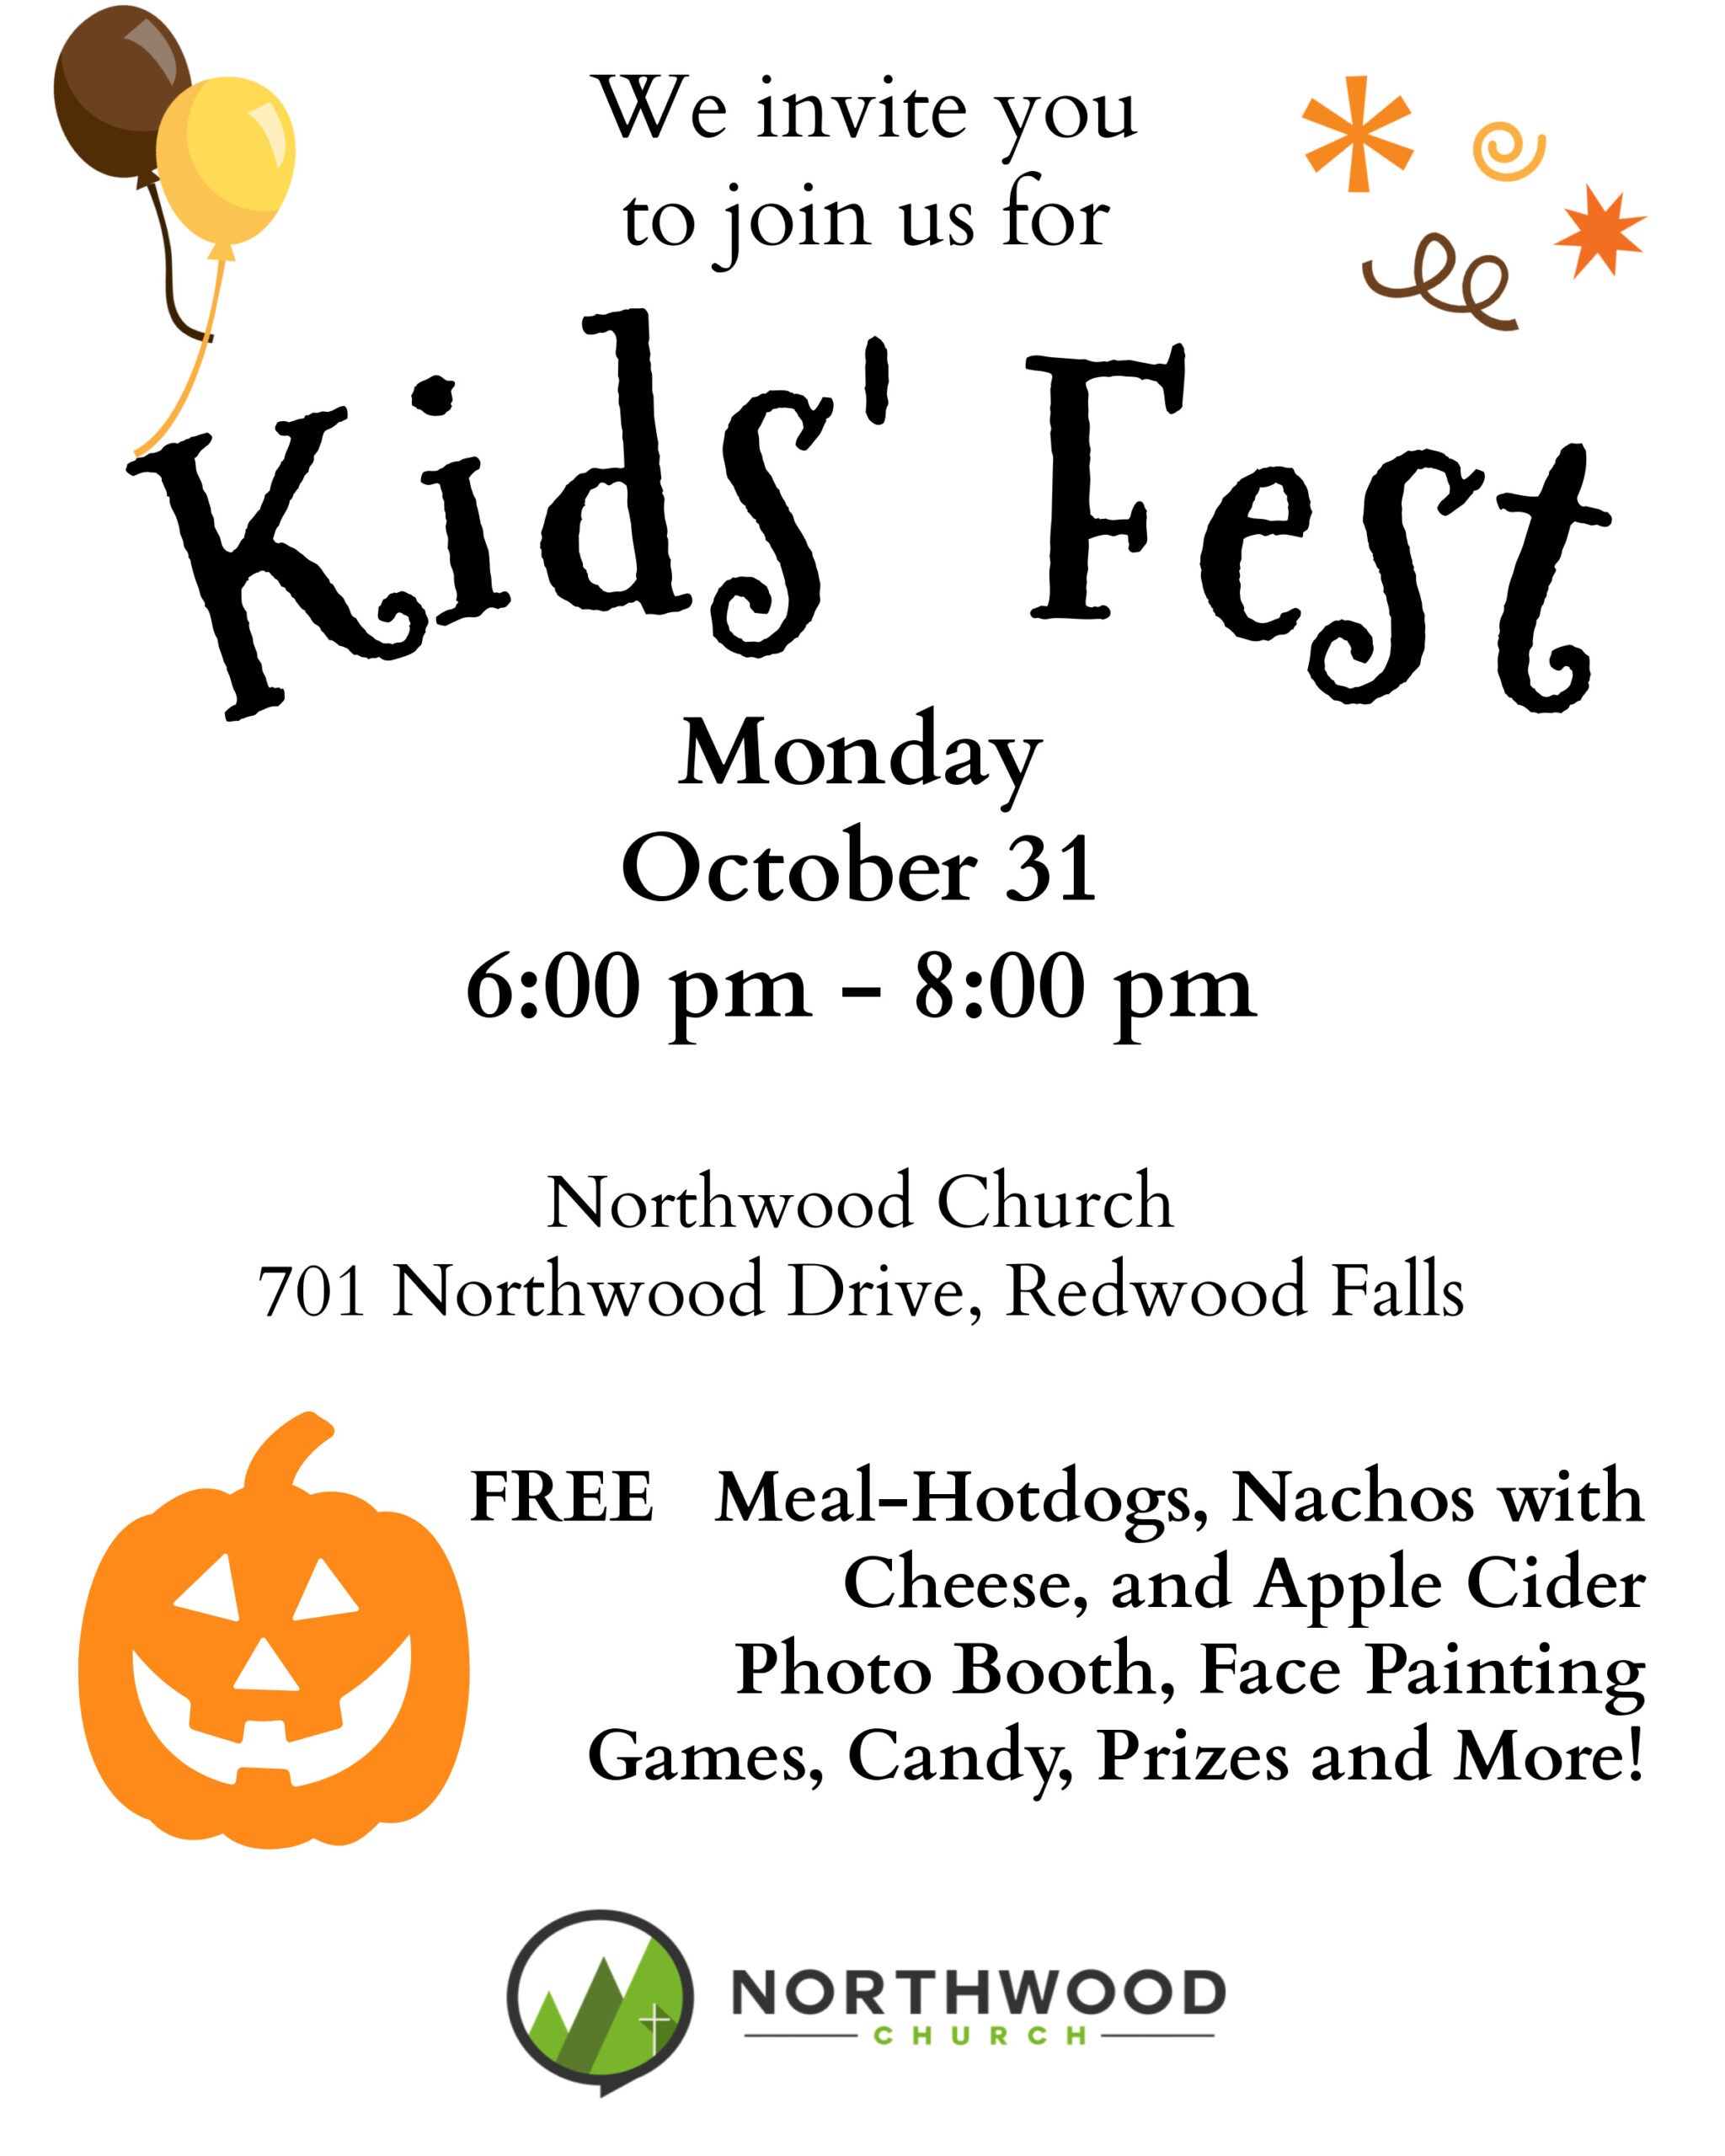 <h1 class="tribe-events-single-event-title">Northwood Church Kids Fest</h1>